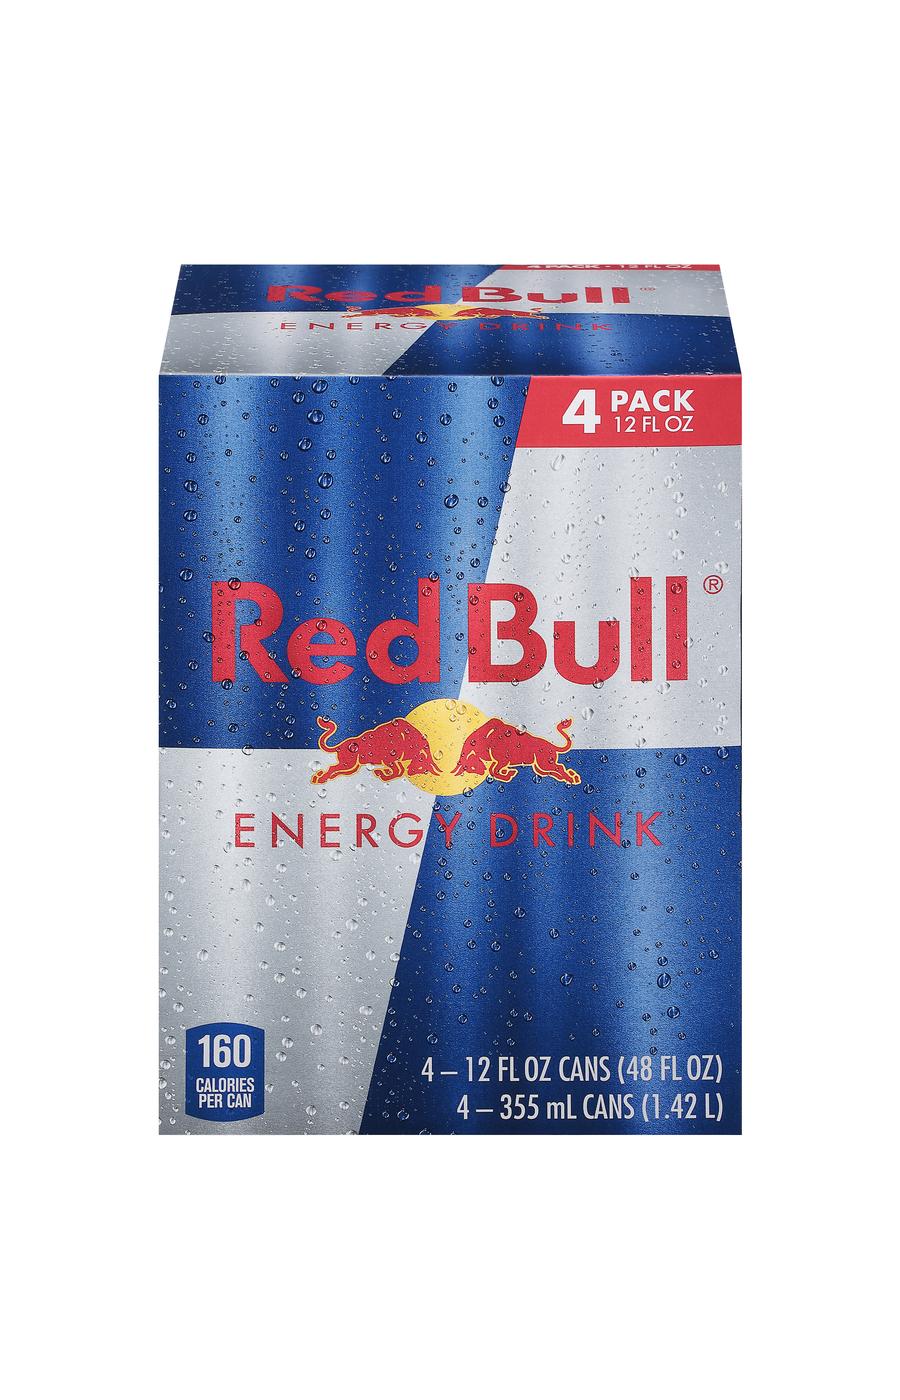 Red Bull Energy Drink Cans - Shop Sports & Energy Drinks H-E-B